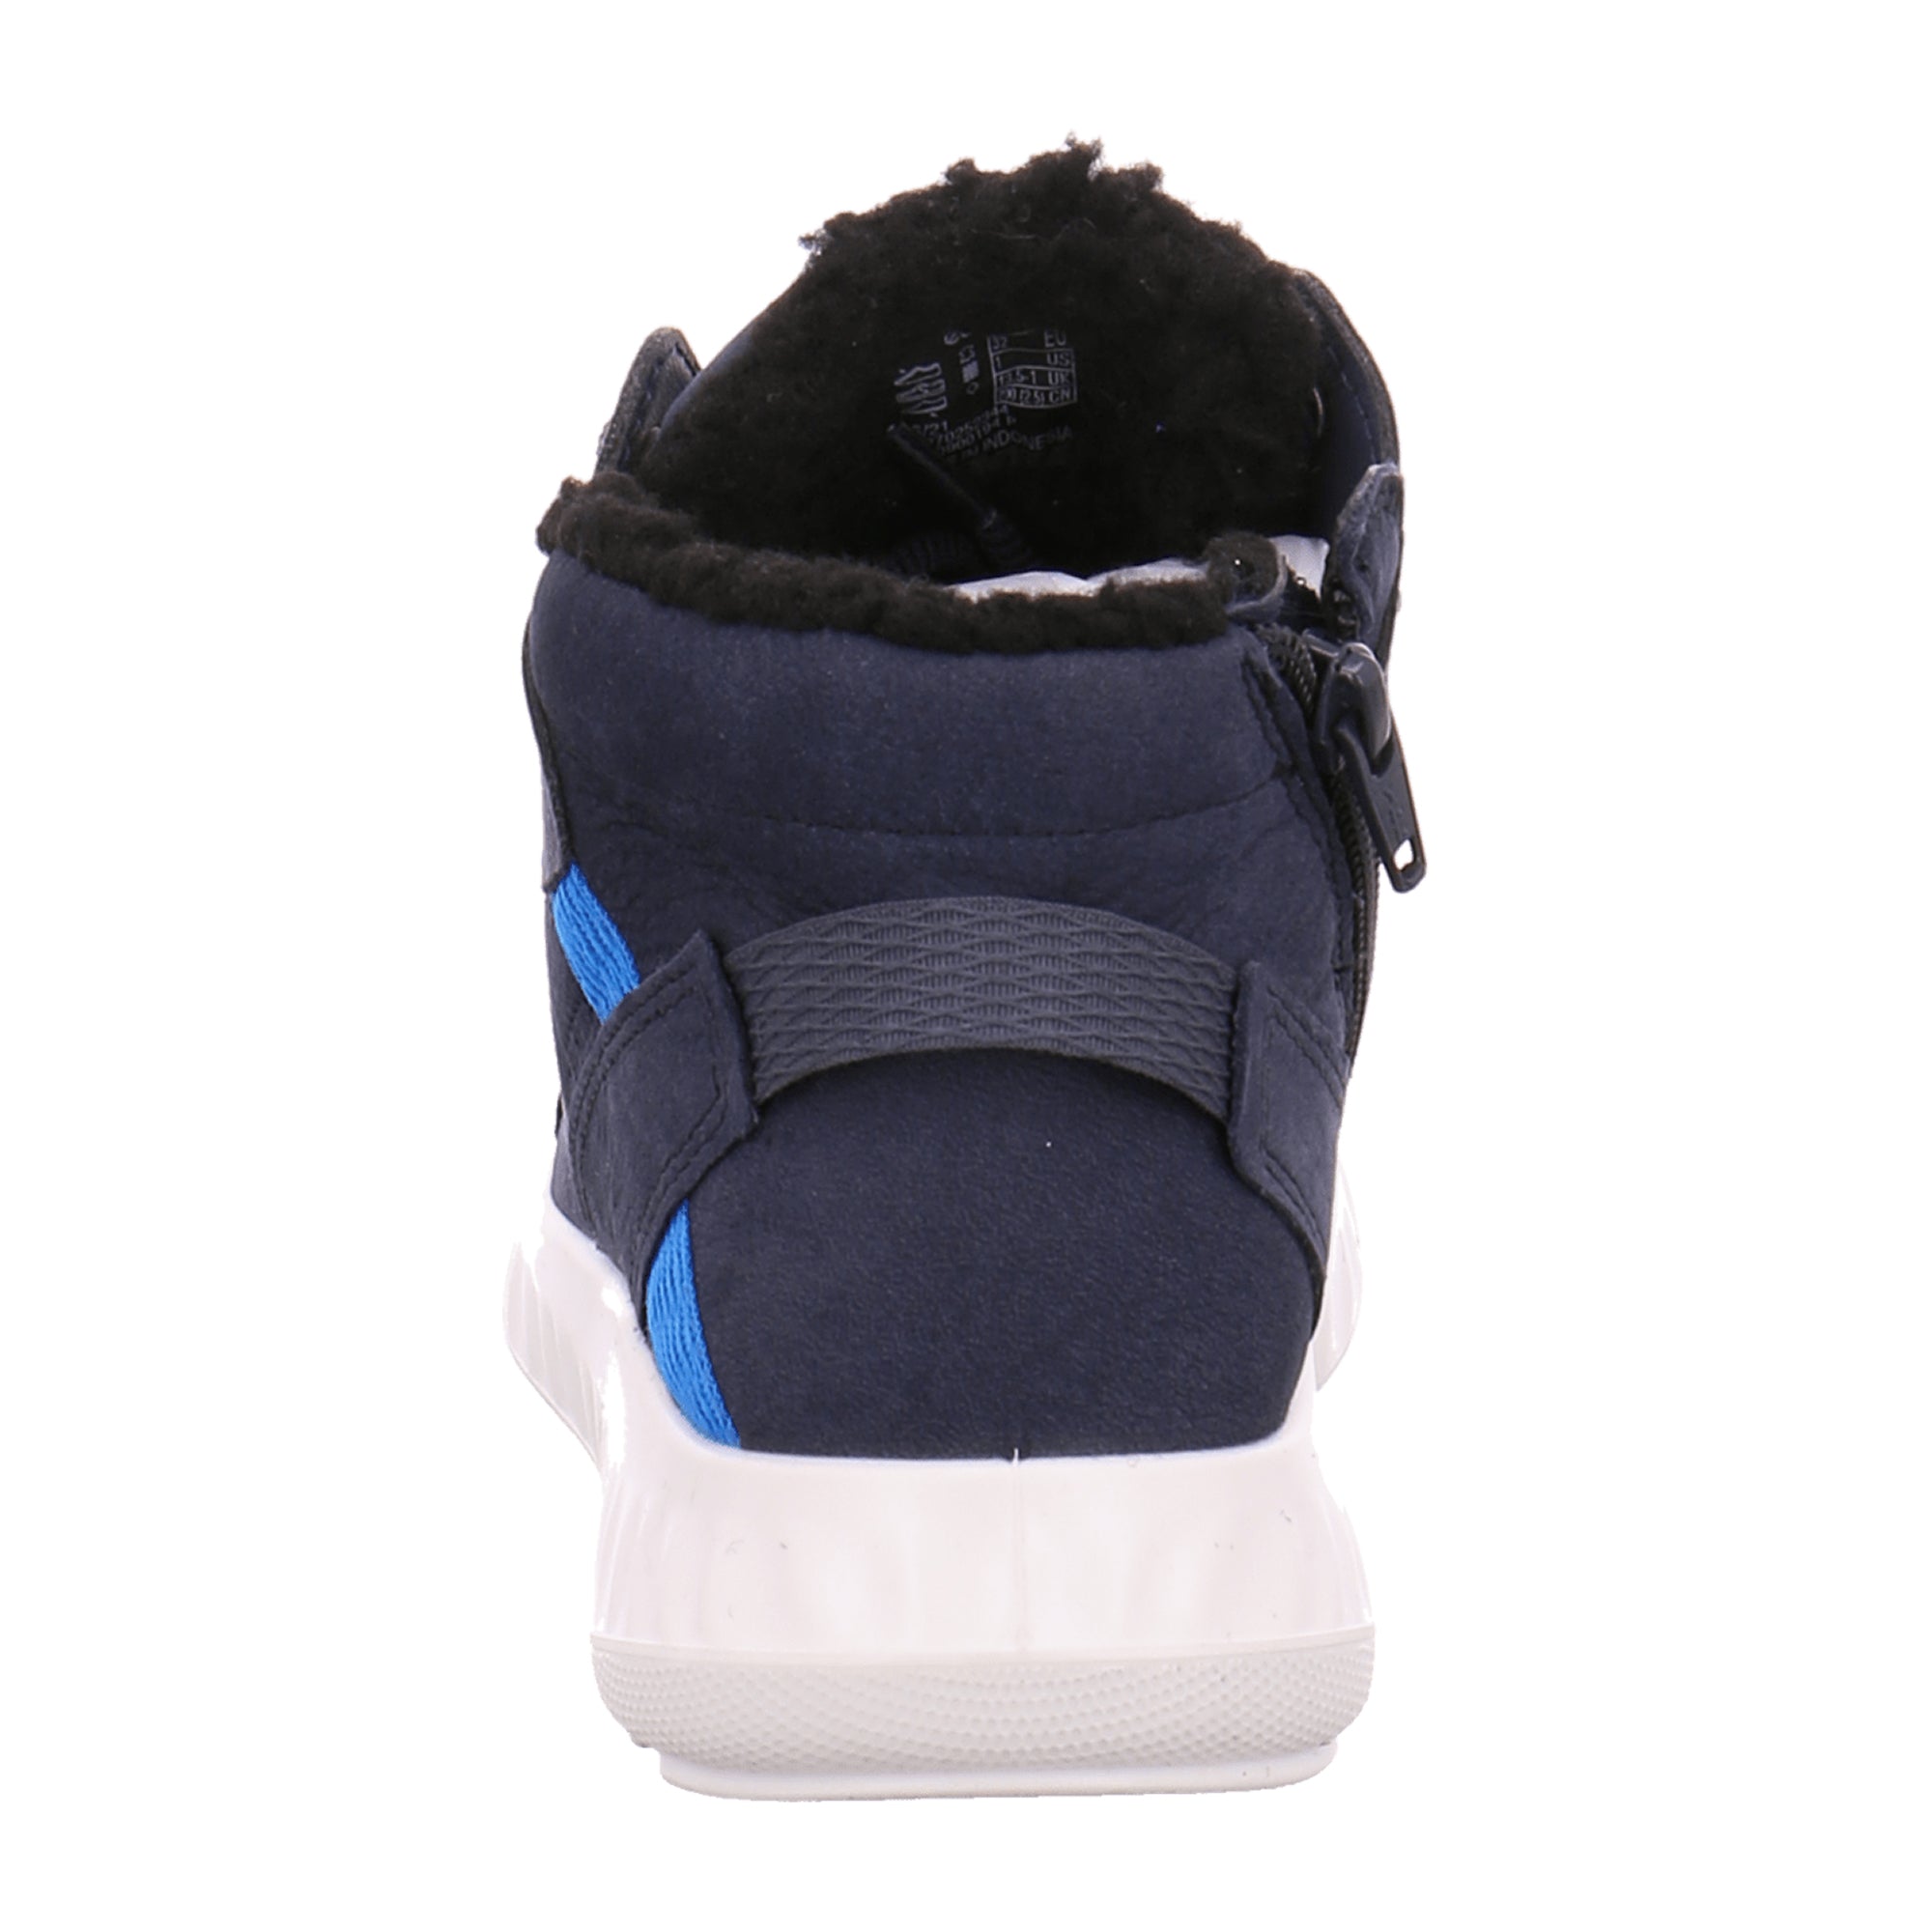 Ecco Kids Blue Shoes for Children - Durable & Stylish